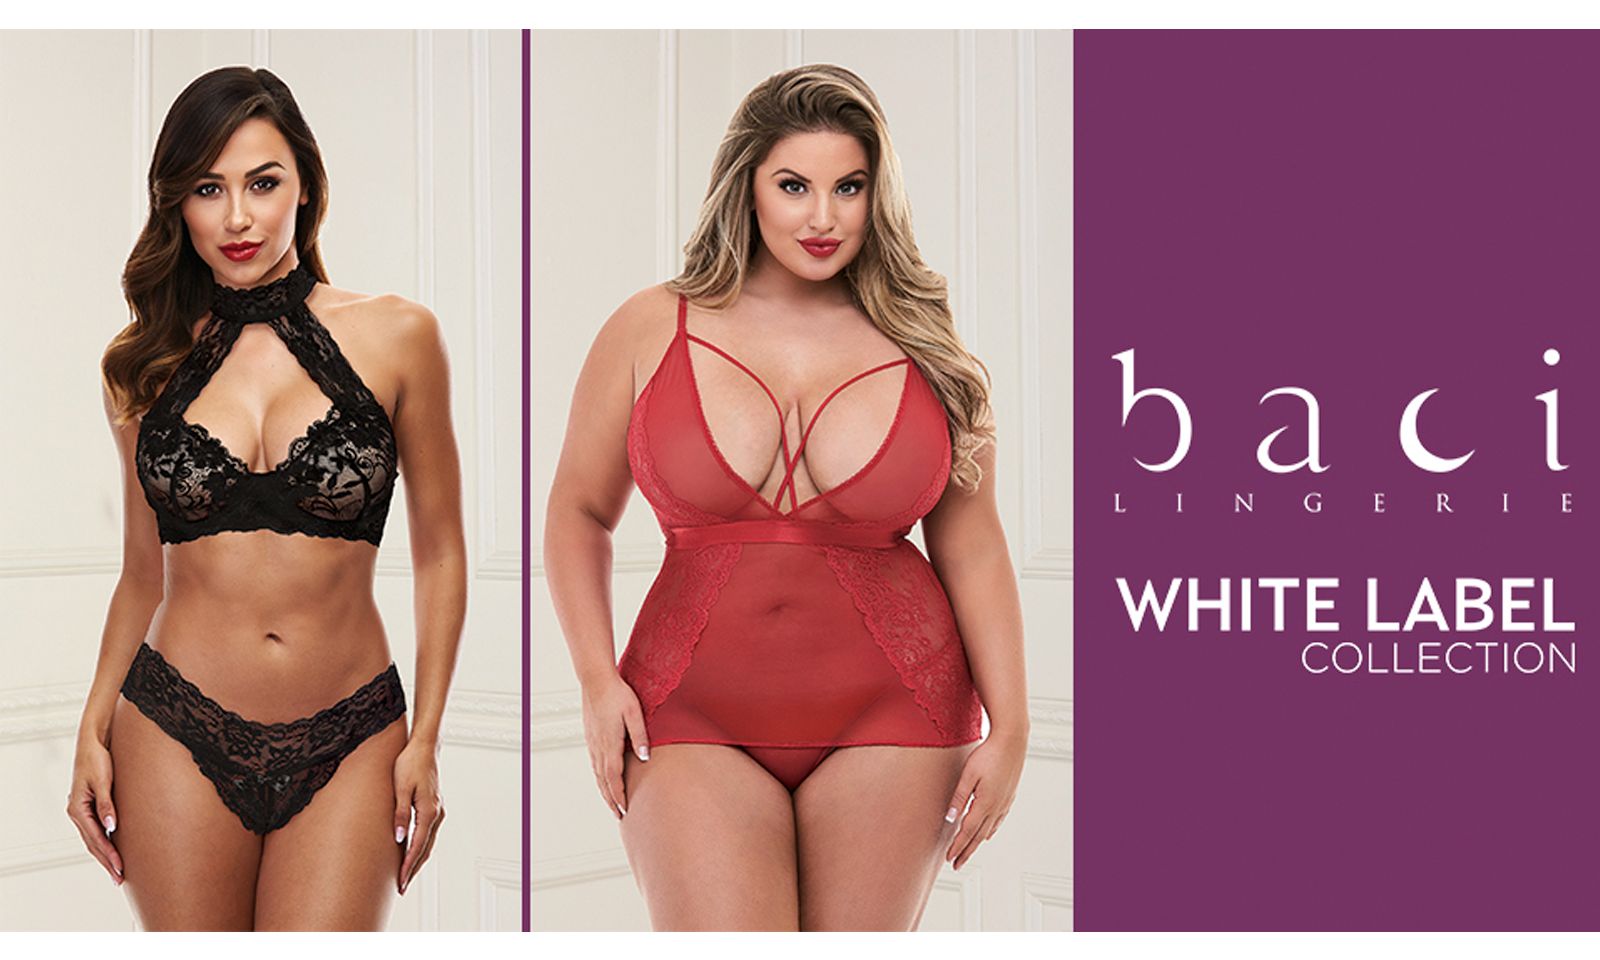 New Styles Added to Baci Lingerie’s White Label Collection